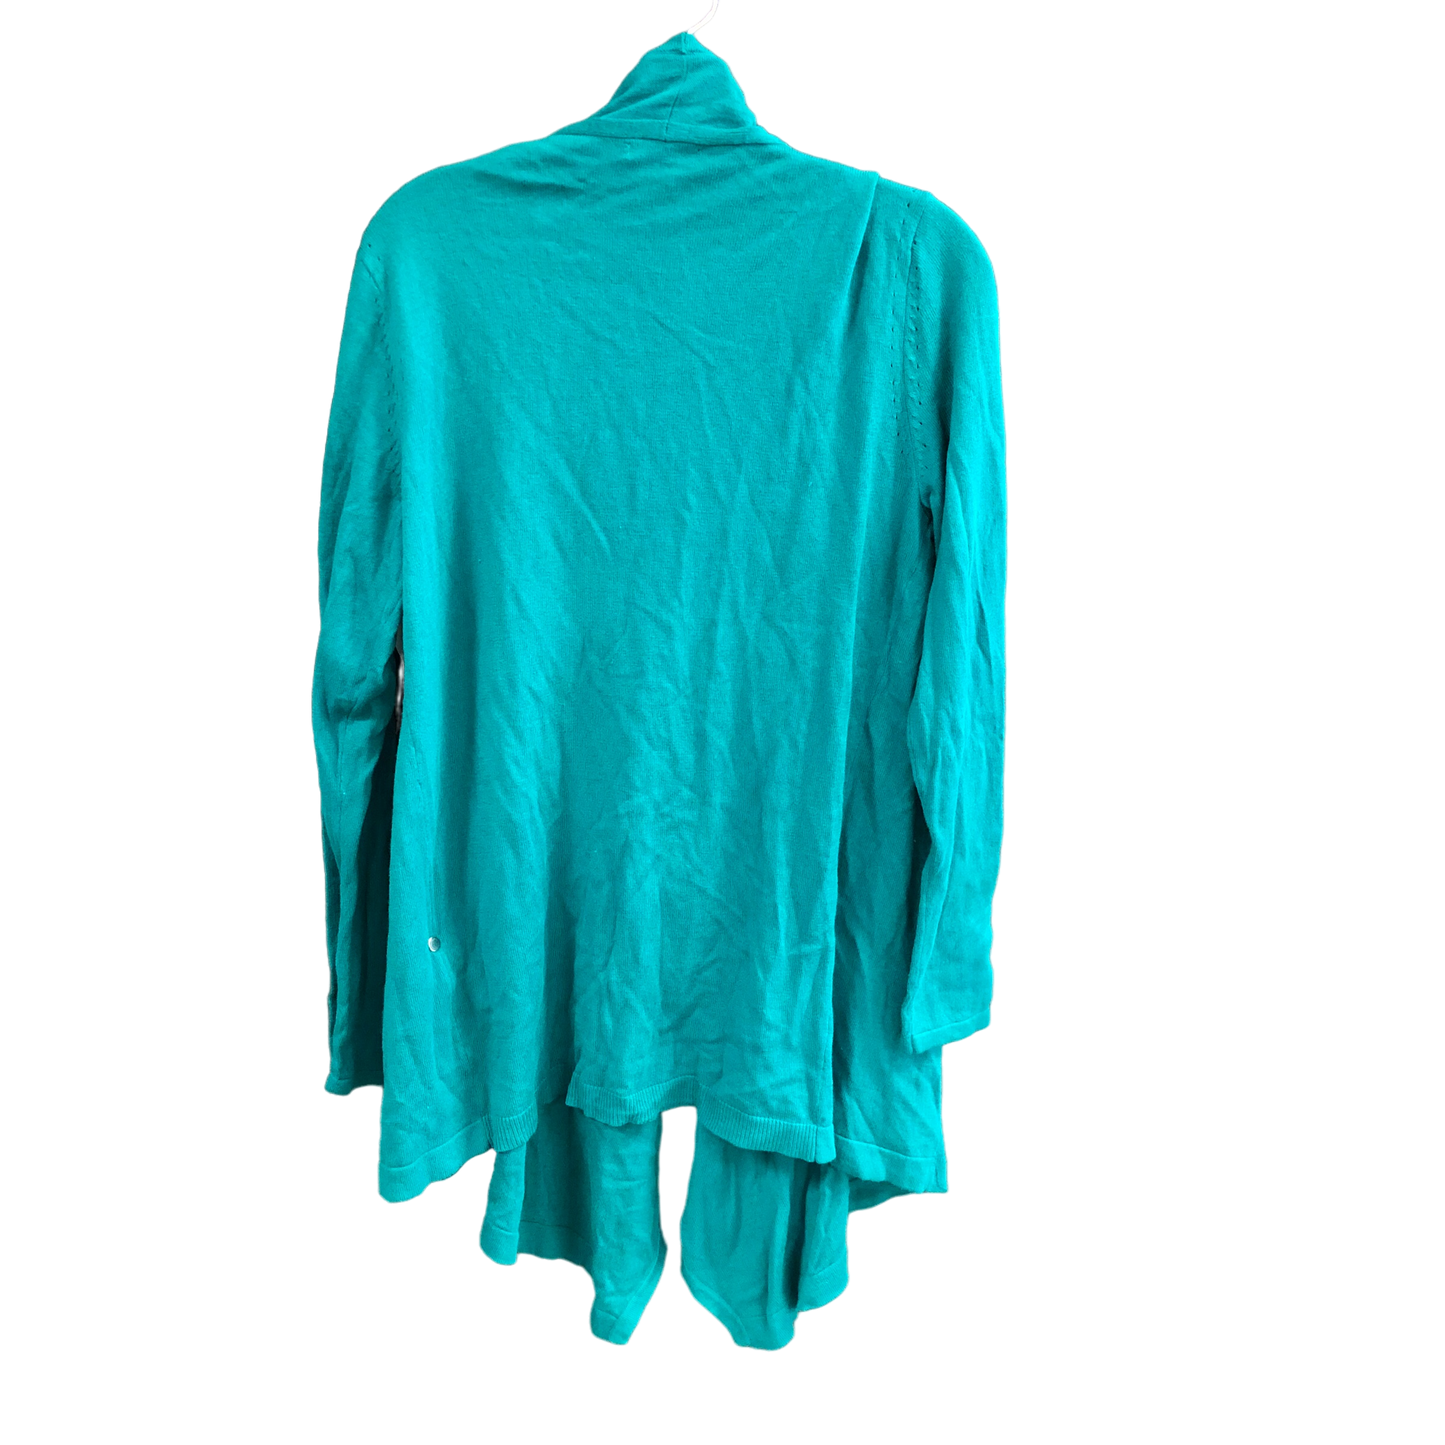 Teal Cardigan New York And Co, Size L